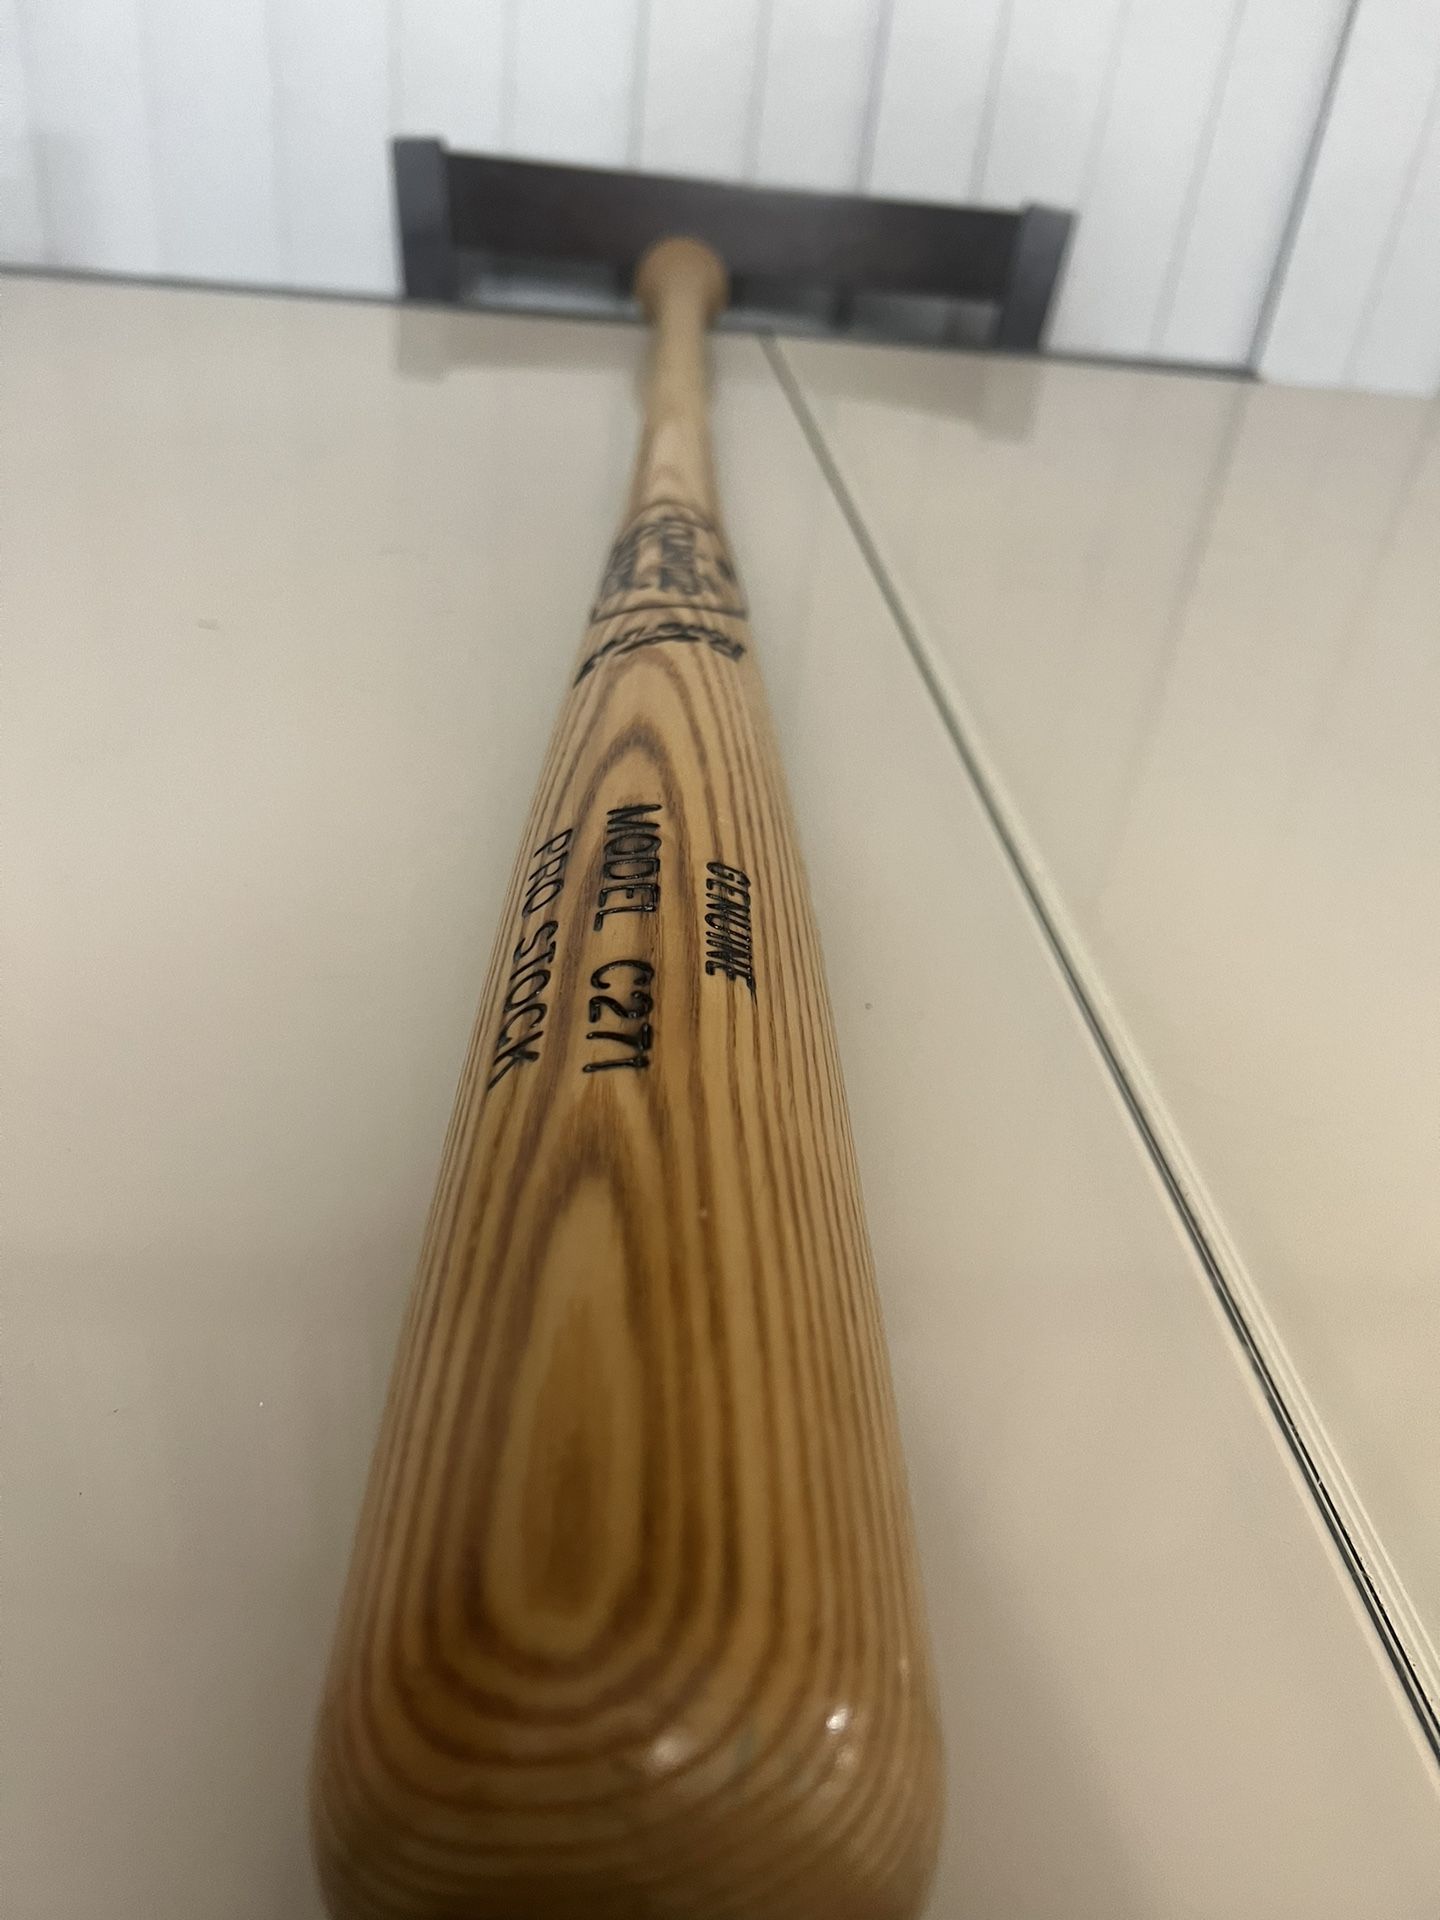 Louisville Slugger 125 Professional Bat Model C271 Pro Stock Powerized  New without retail packaging or tags. New however there are a few scratches an